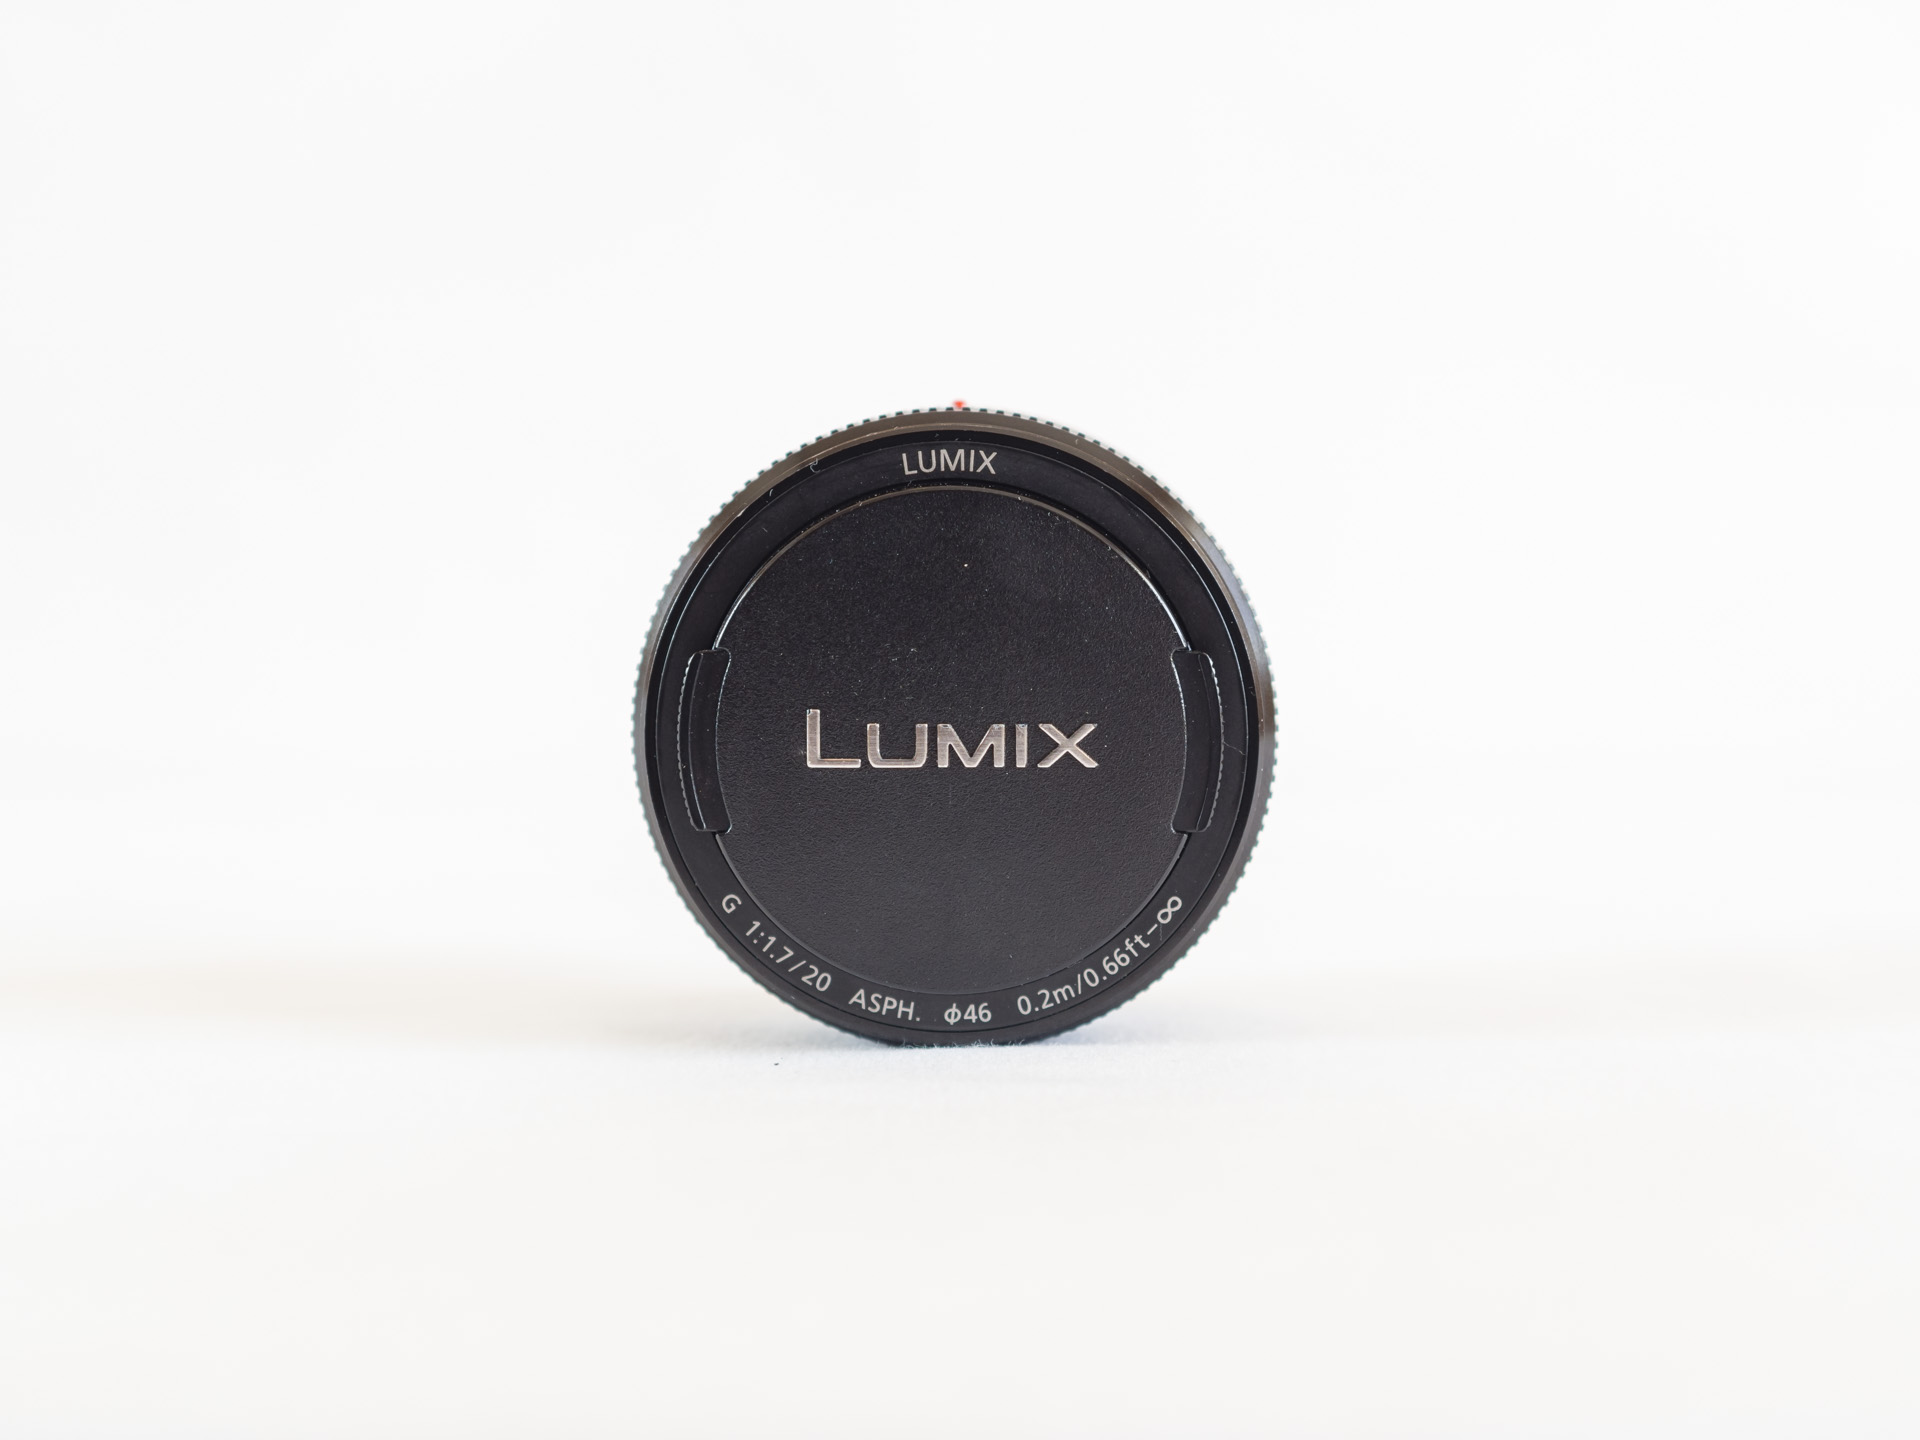 UV Ultraviolet Clear Haze Glass Protection Protector Cover Filter for Panasonic Lumix G 20mm f1.7 II ASPH Lens